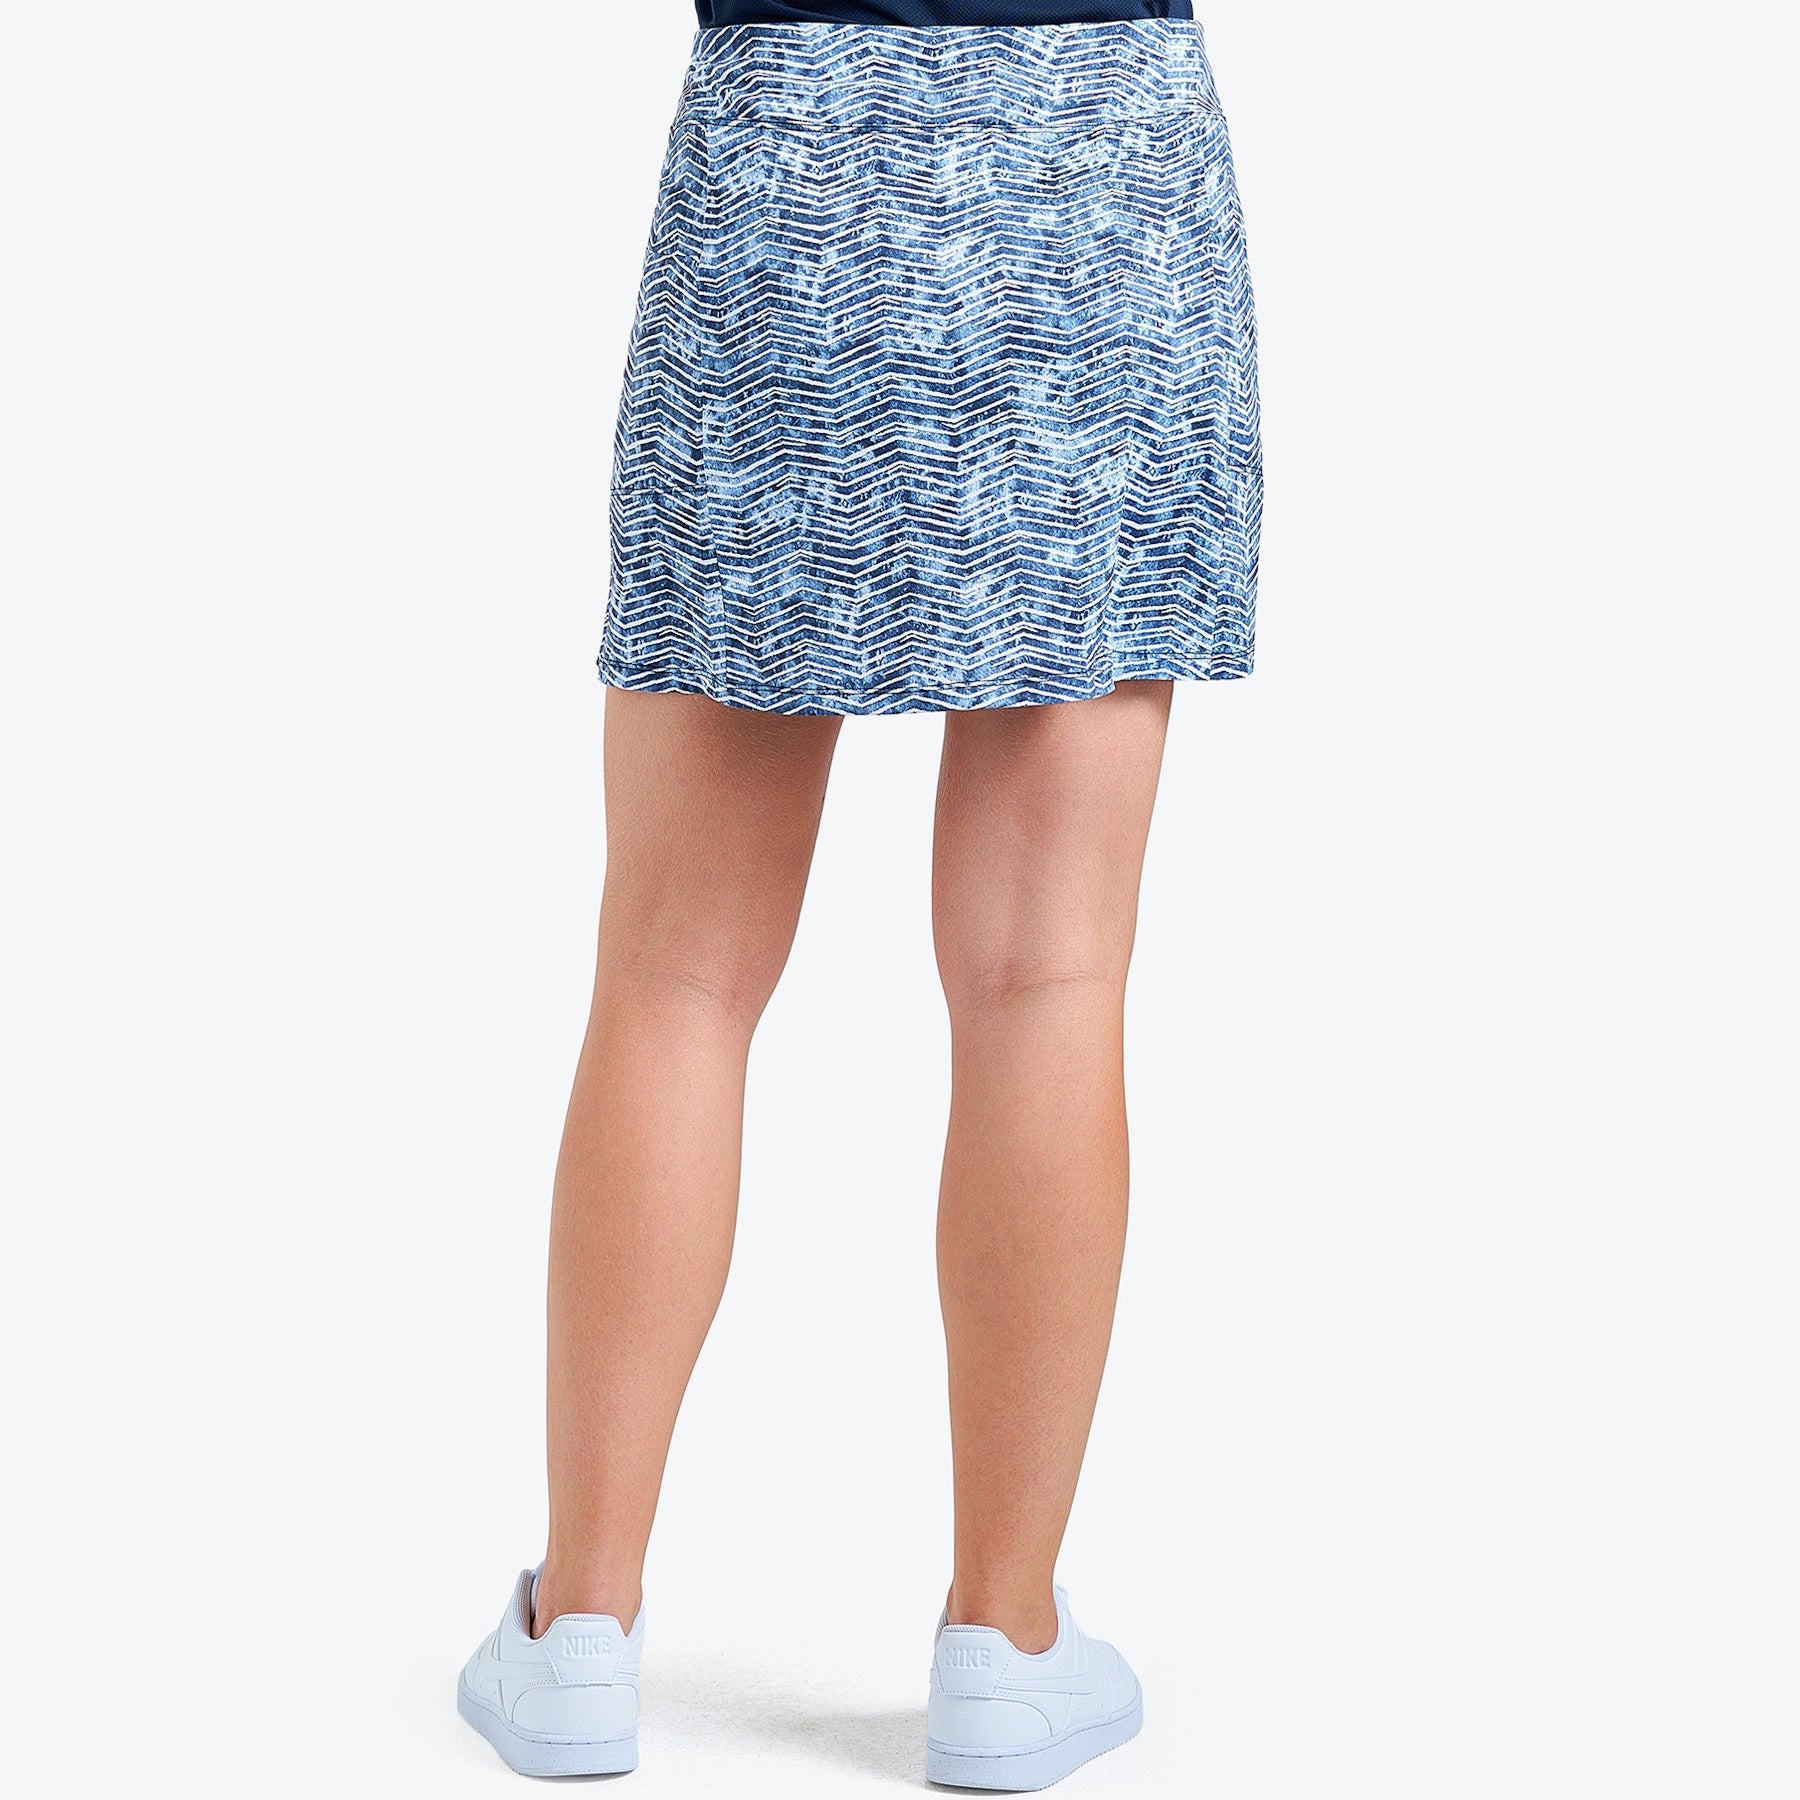 Nivo Layla Liv Cool Pull-On Skort in Navy Print Rear Facing Product Image